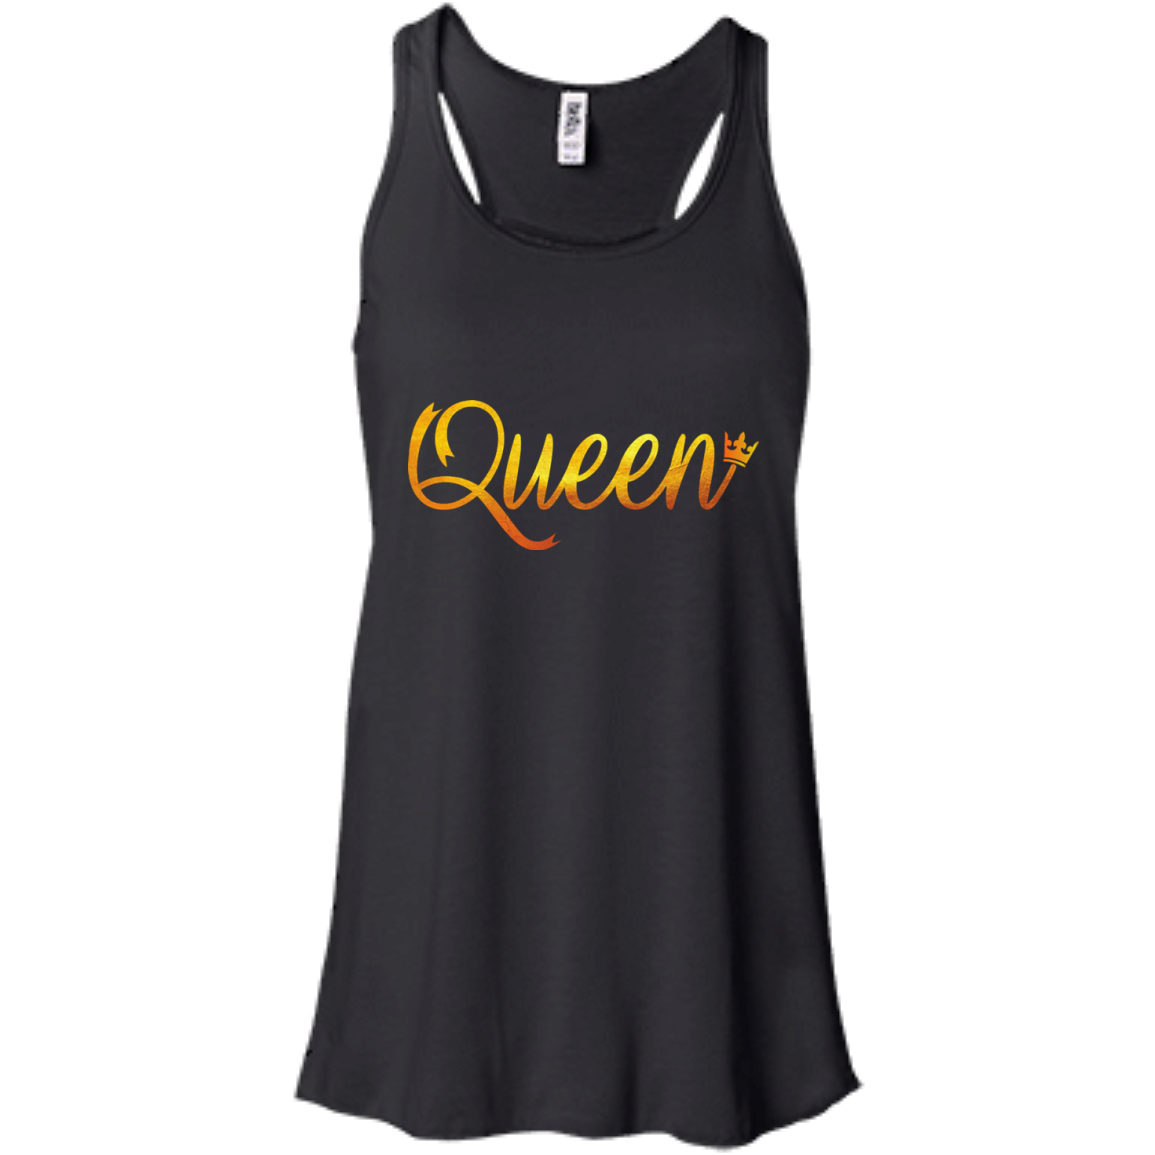 "Queen" Lesbian Couple Valentine's Day Special Shirt